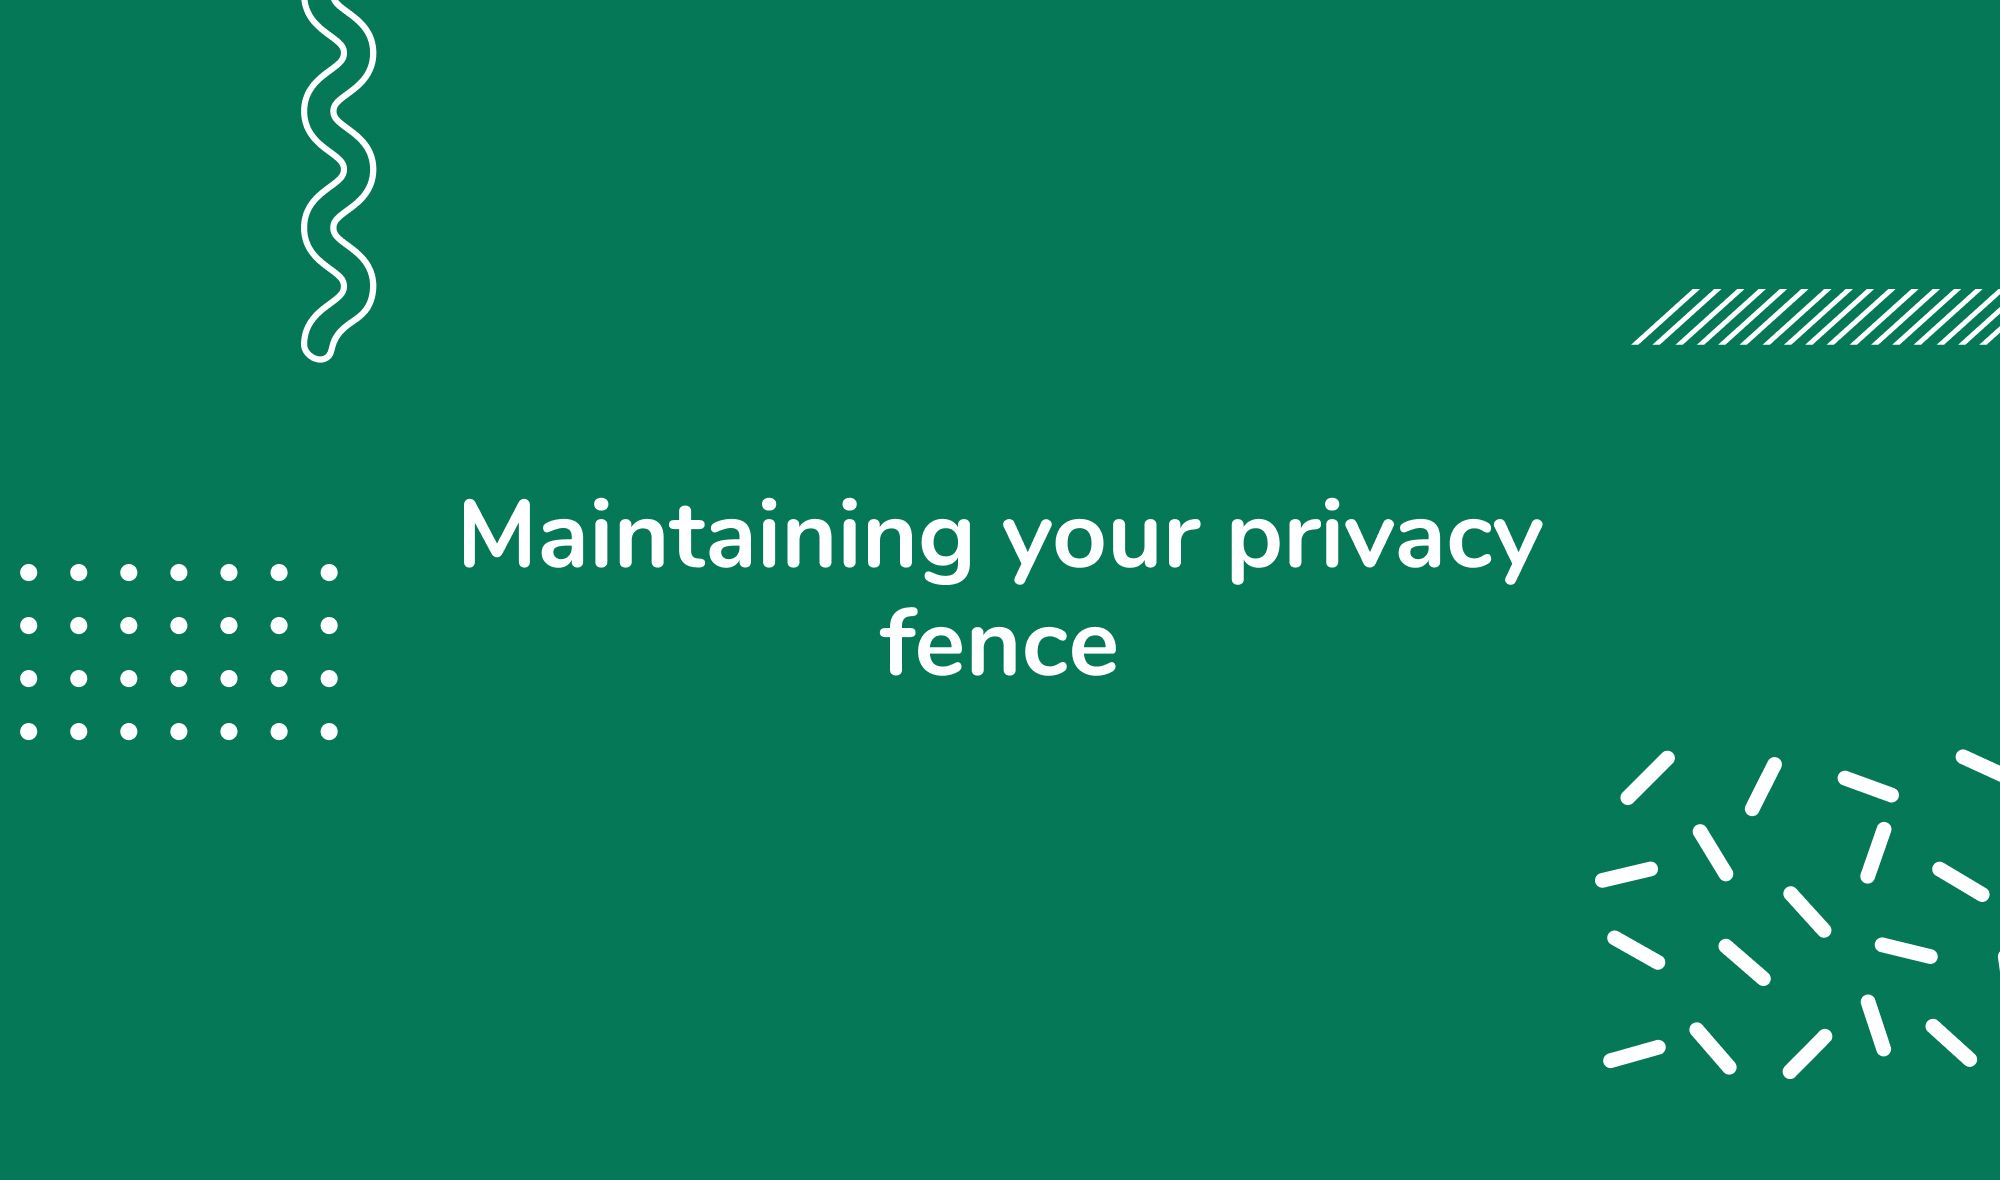 Maintaining your privacy fence